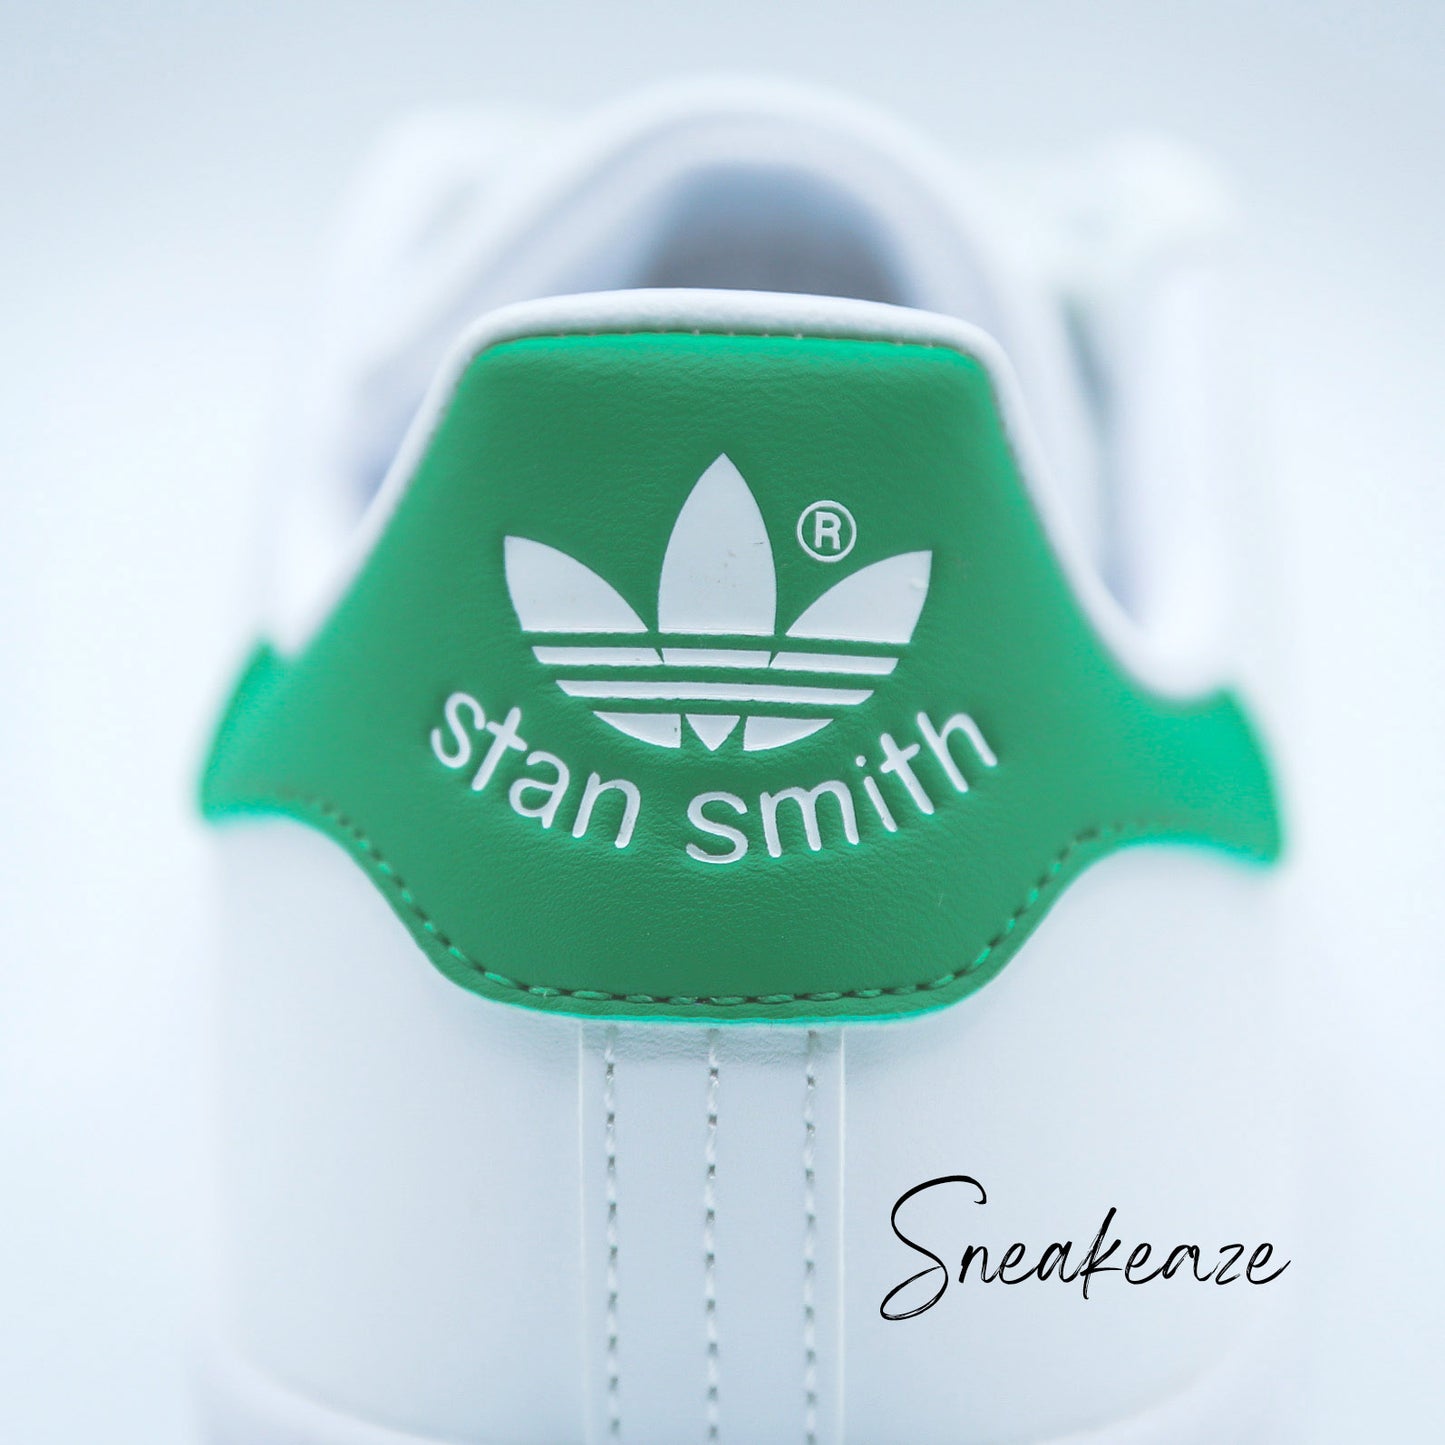 Just Married - Stan Smith custom